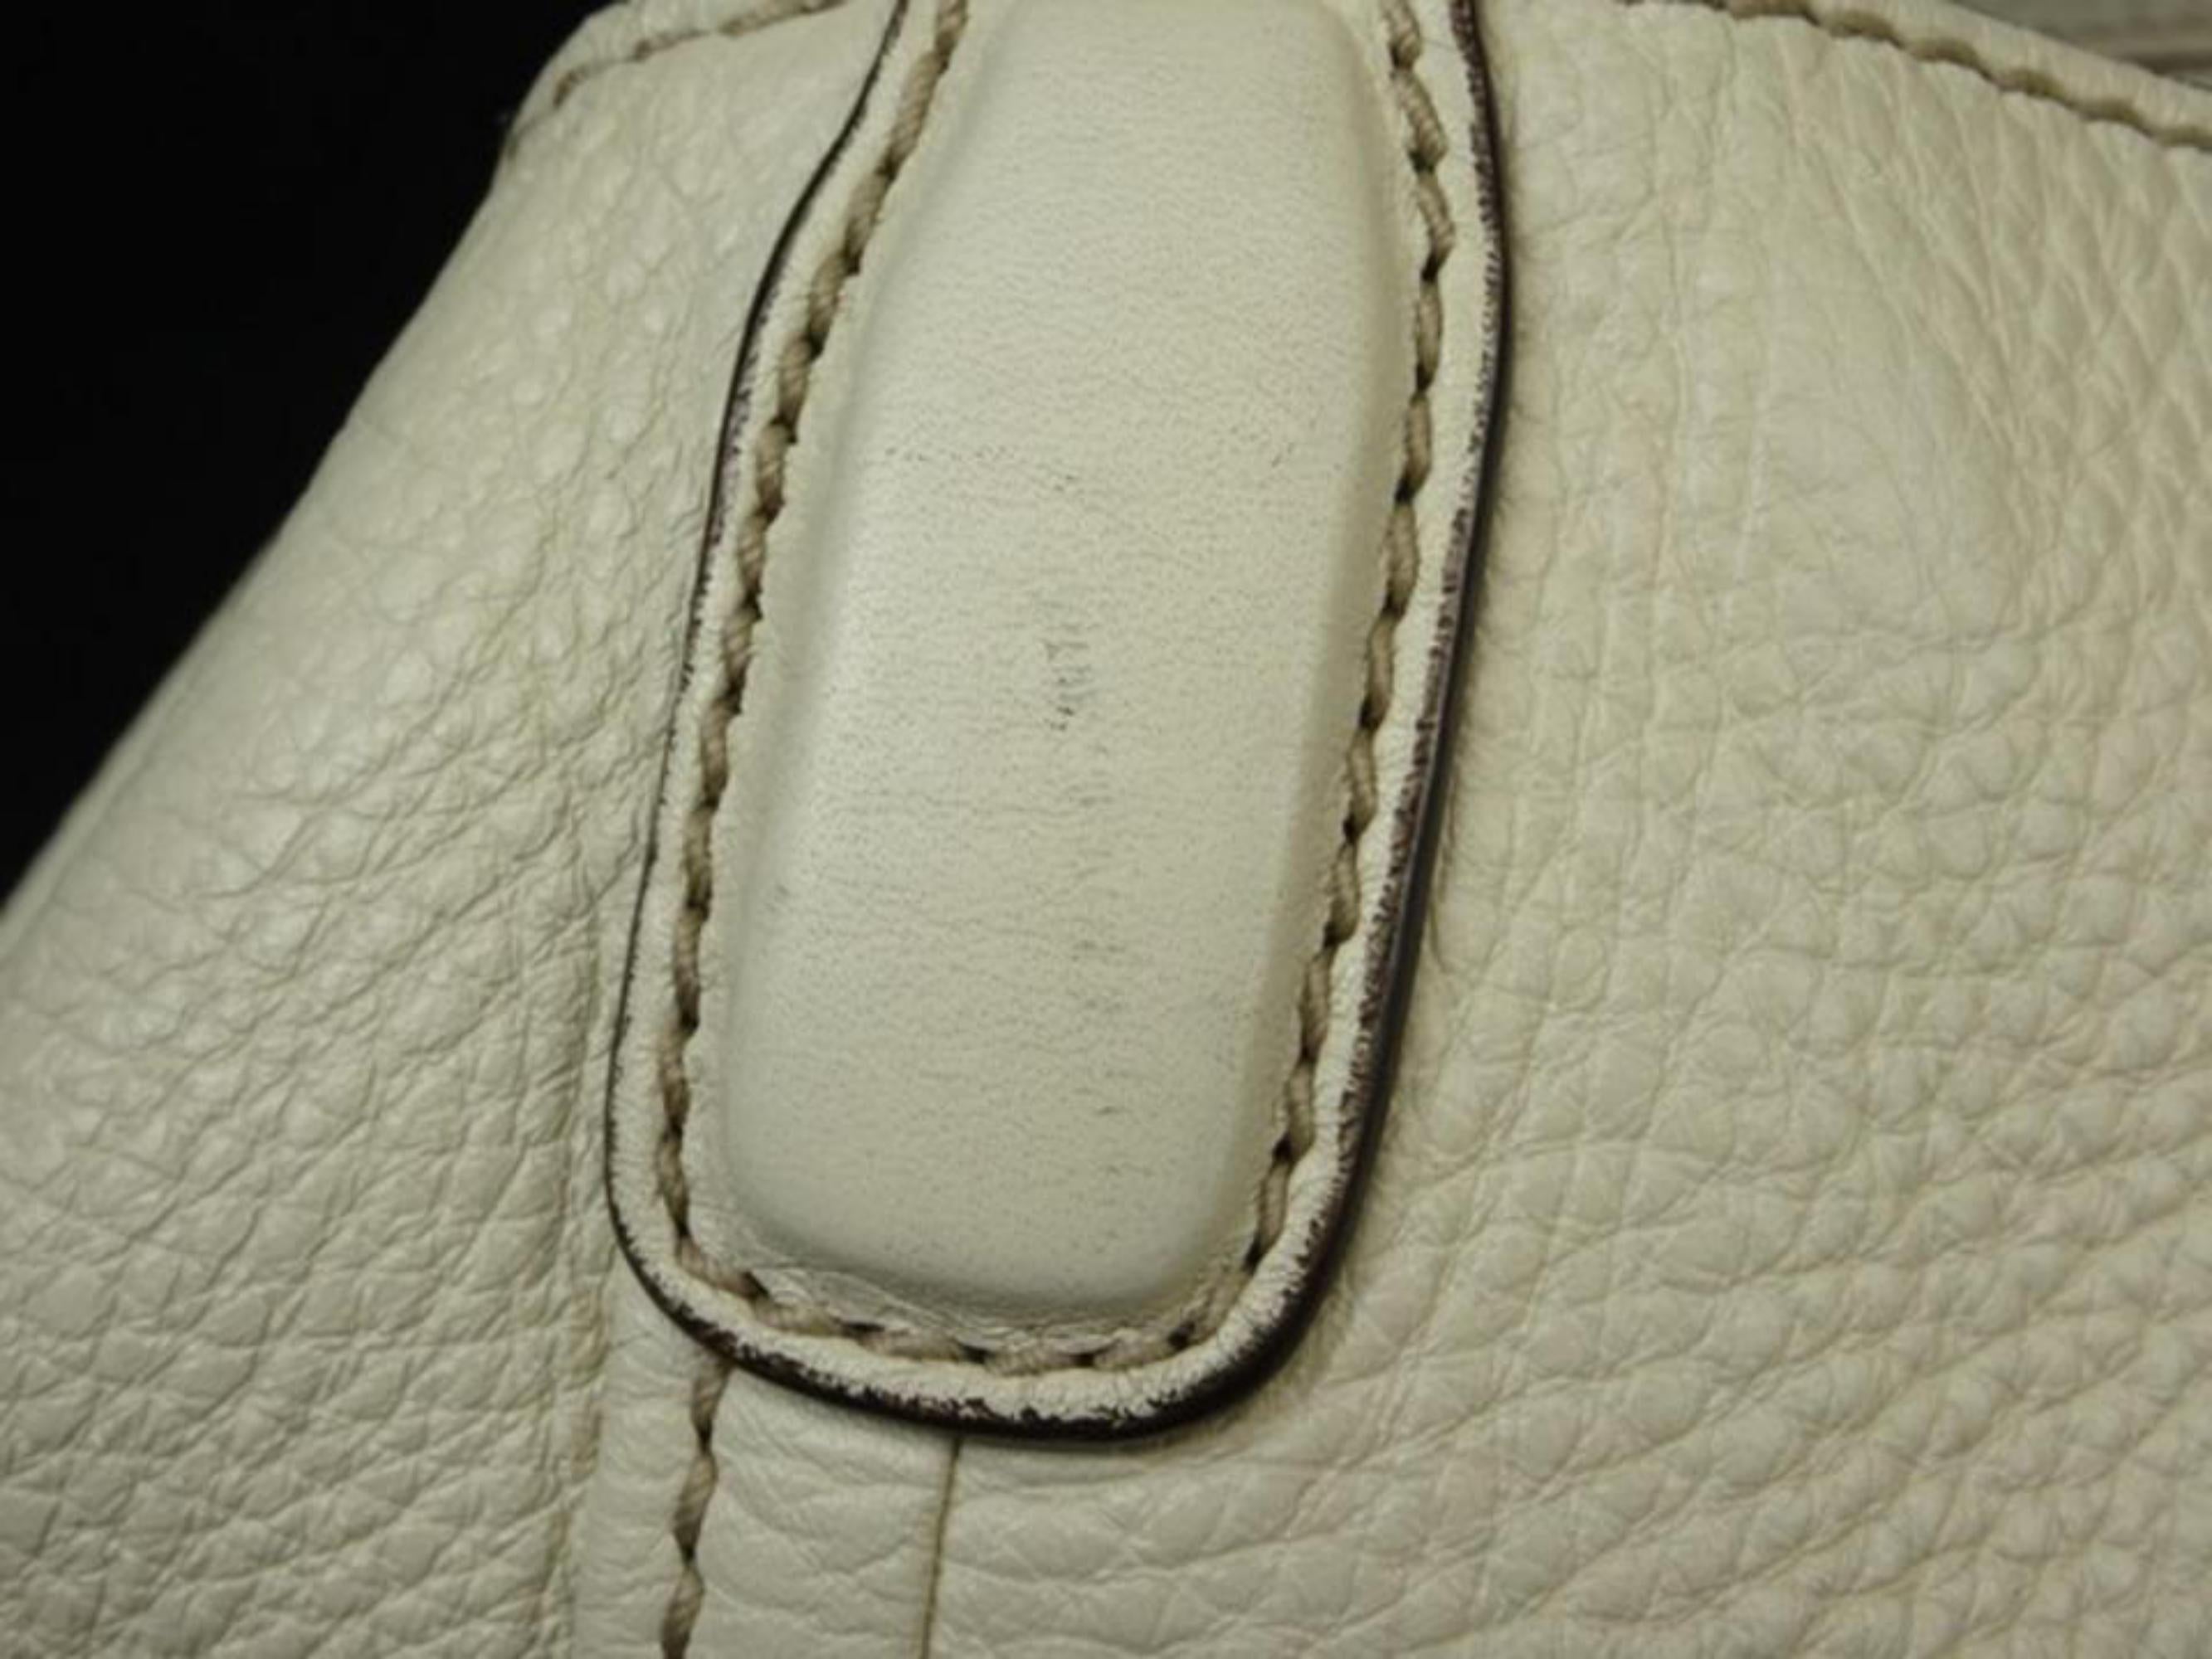 Women's Gucci Soho Convertible 219069 Ivory Leather Shoulder Bag For Sale